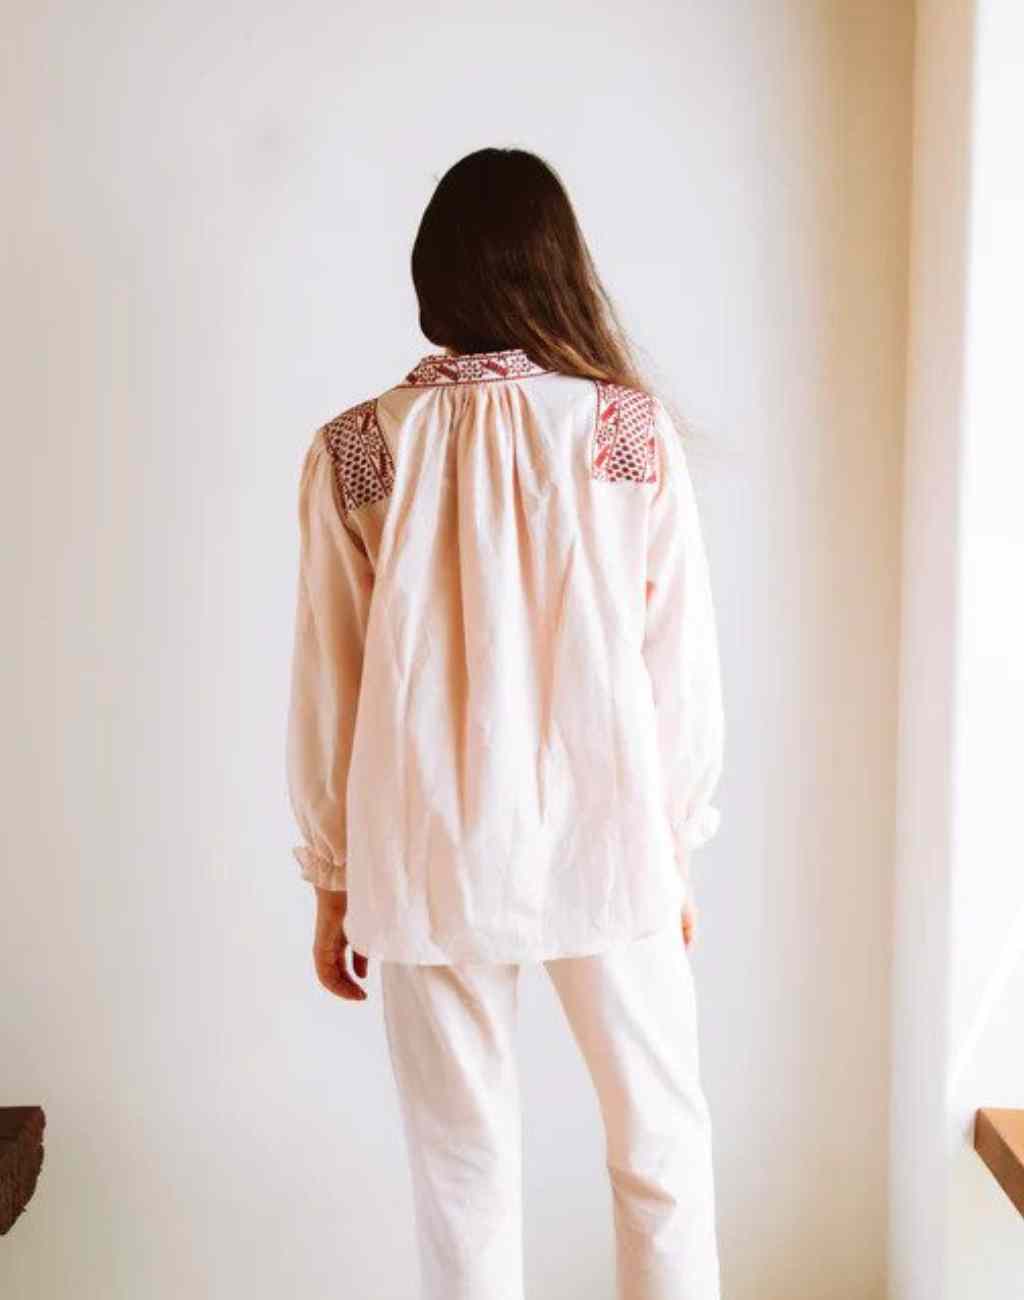 Textured Cotton Shirt with Embroidery Details - Visit Nifty JoSephine 